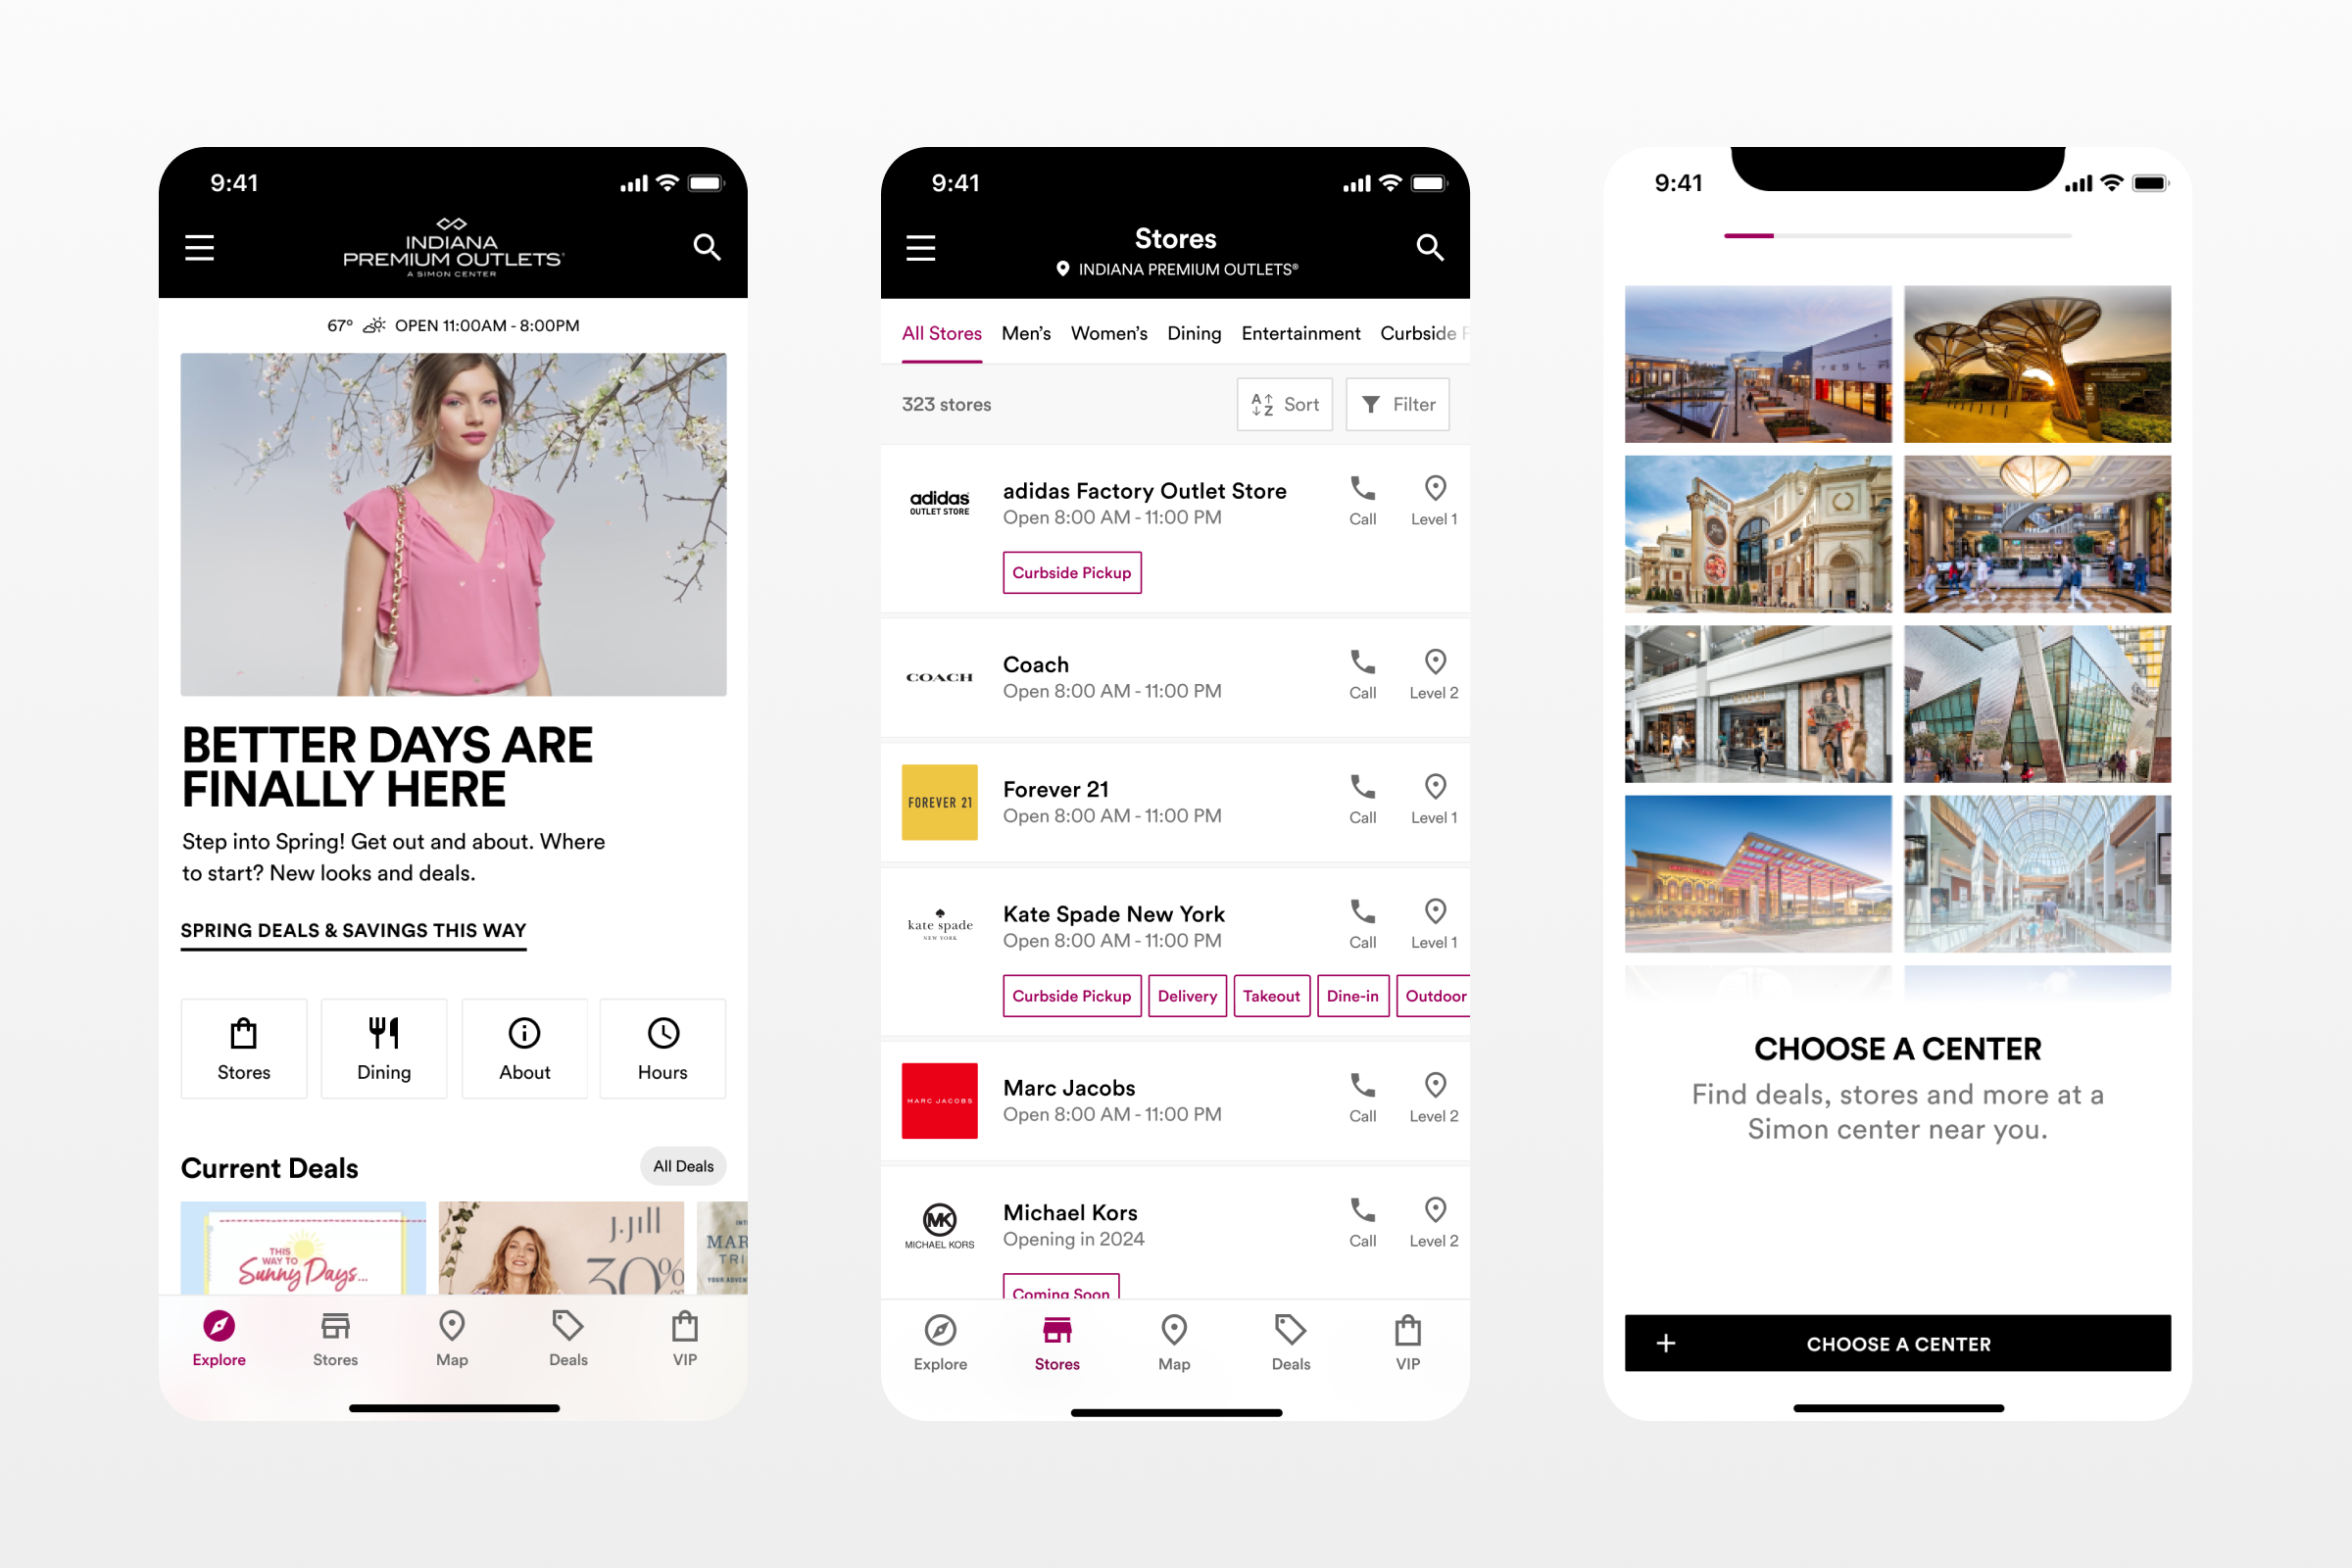 Simon Malls app - A native mobile app for exploring Simon Malls around the world. Design by Seth Richardson, a mobile product designer based in Indy